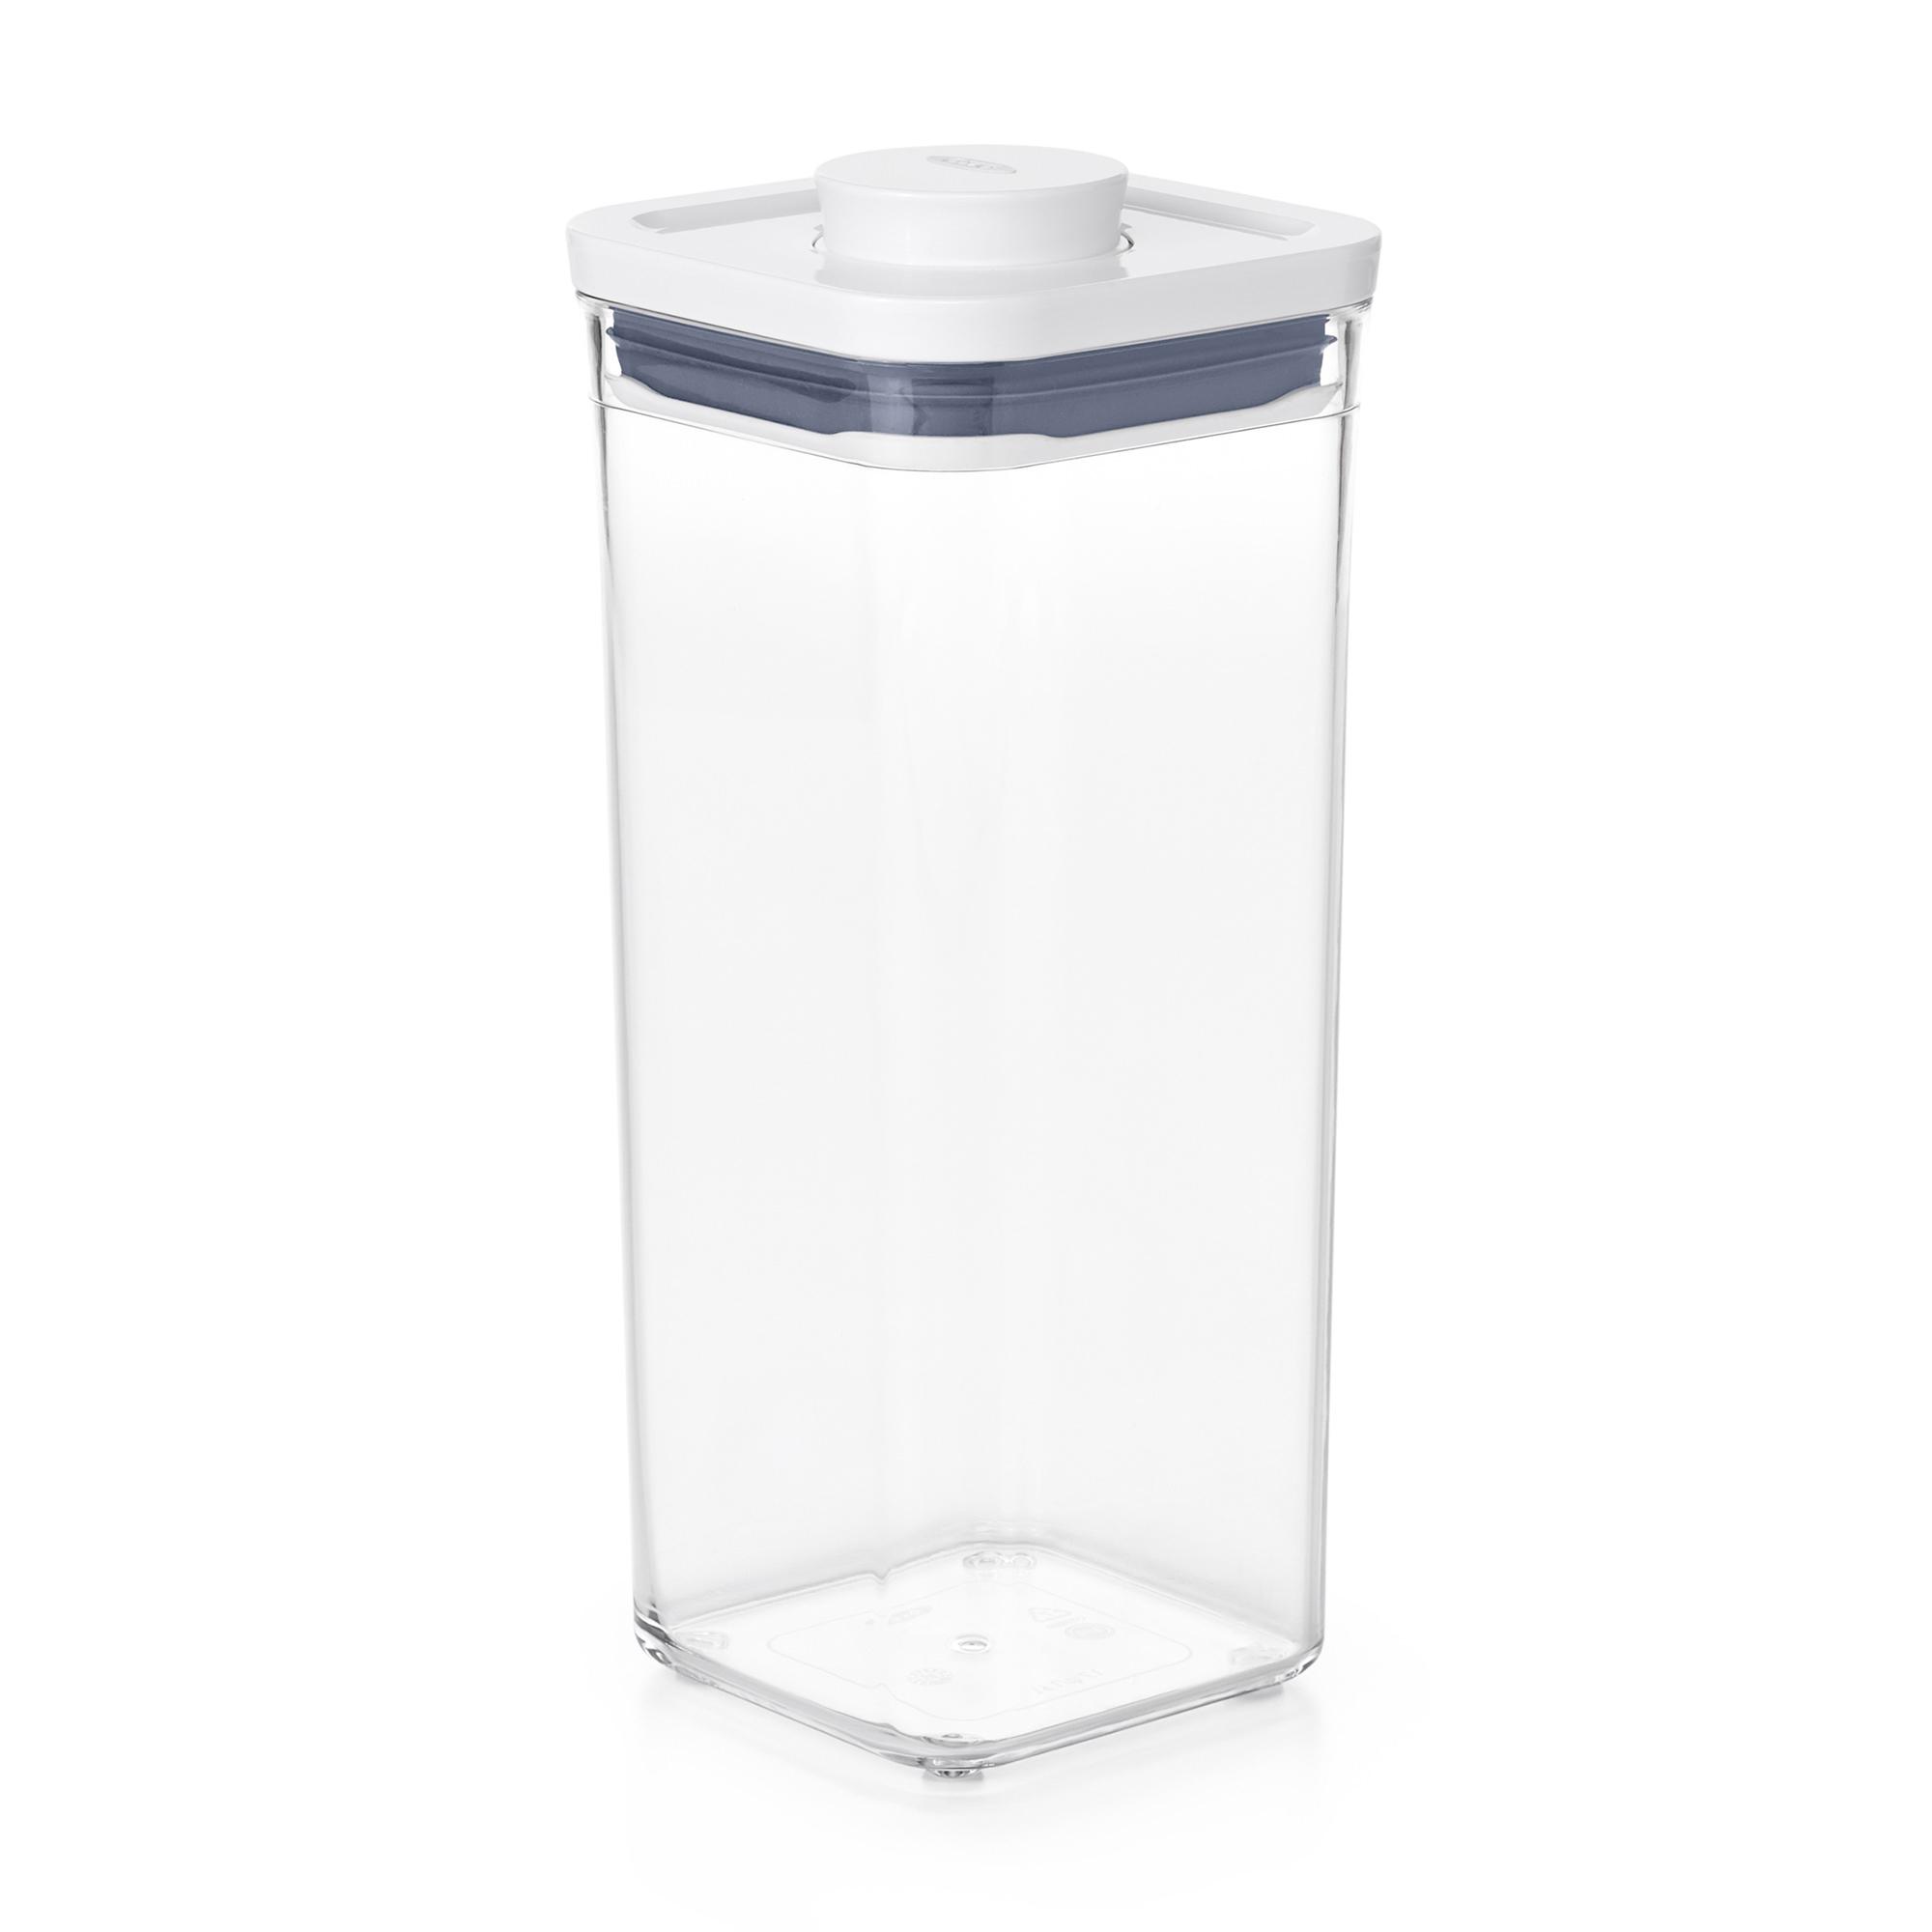 OXO Good Grips Square Pop 2.0 Container 1.6L Image 3